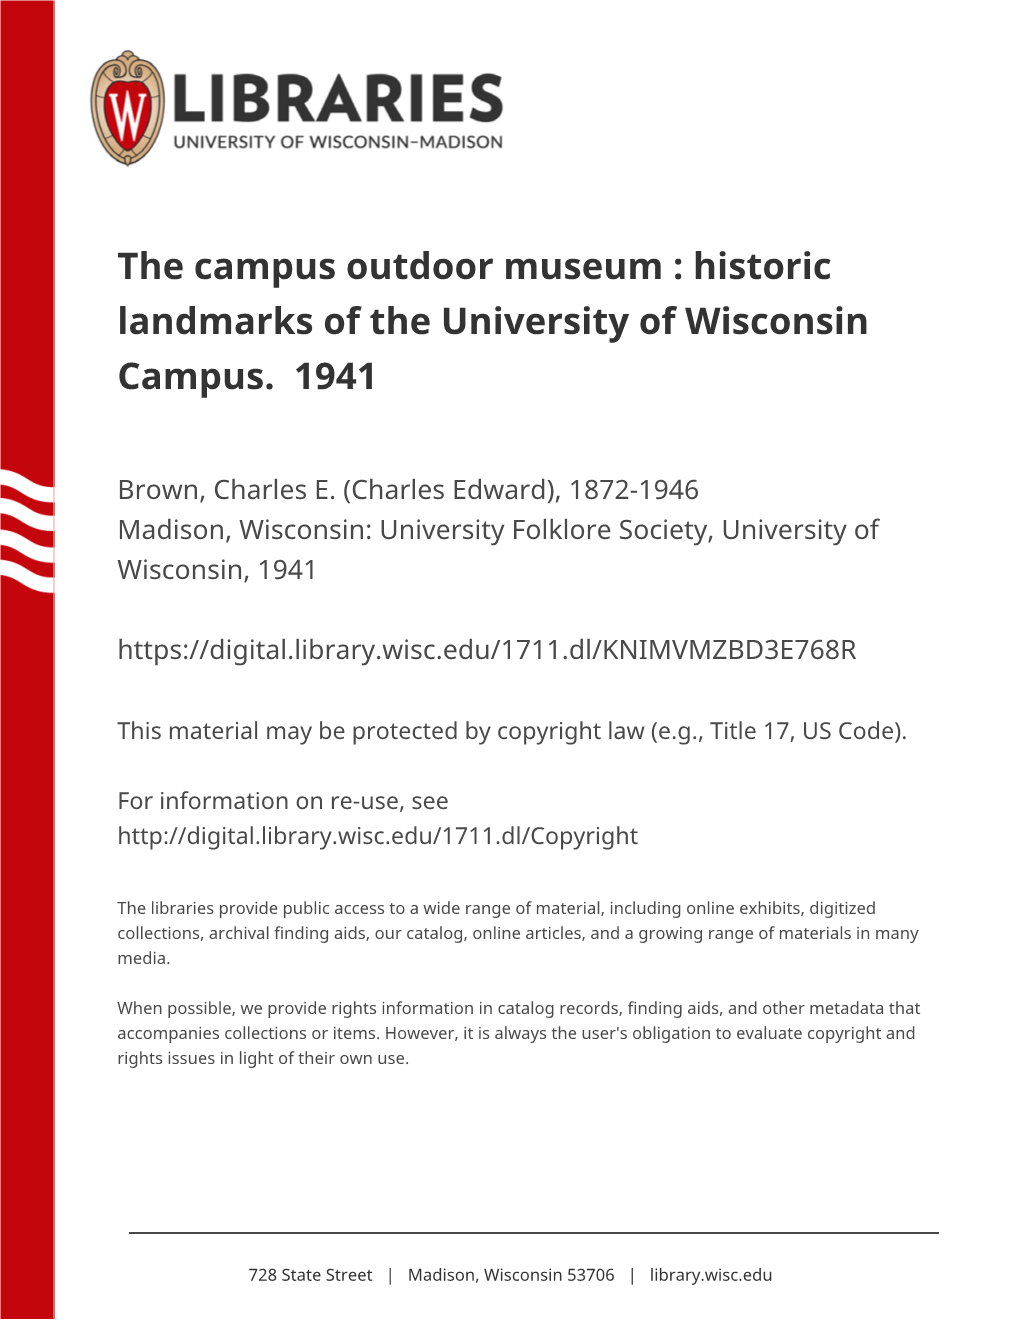 The Campus Outdoor Museum : Historic Landmarks of the University of Wisconsin Campus